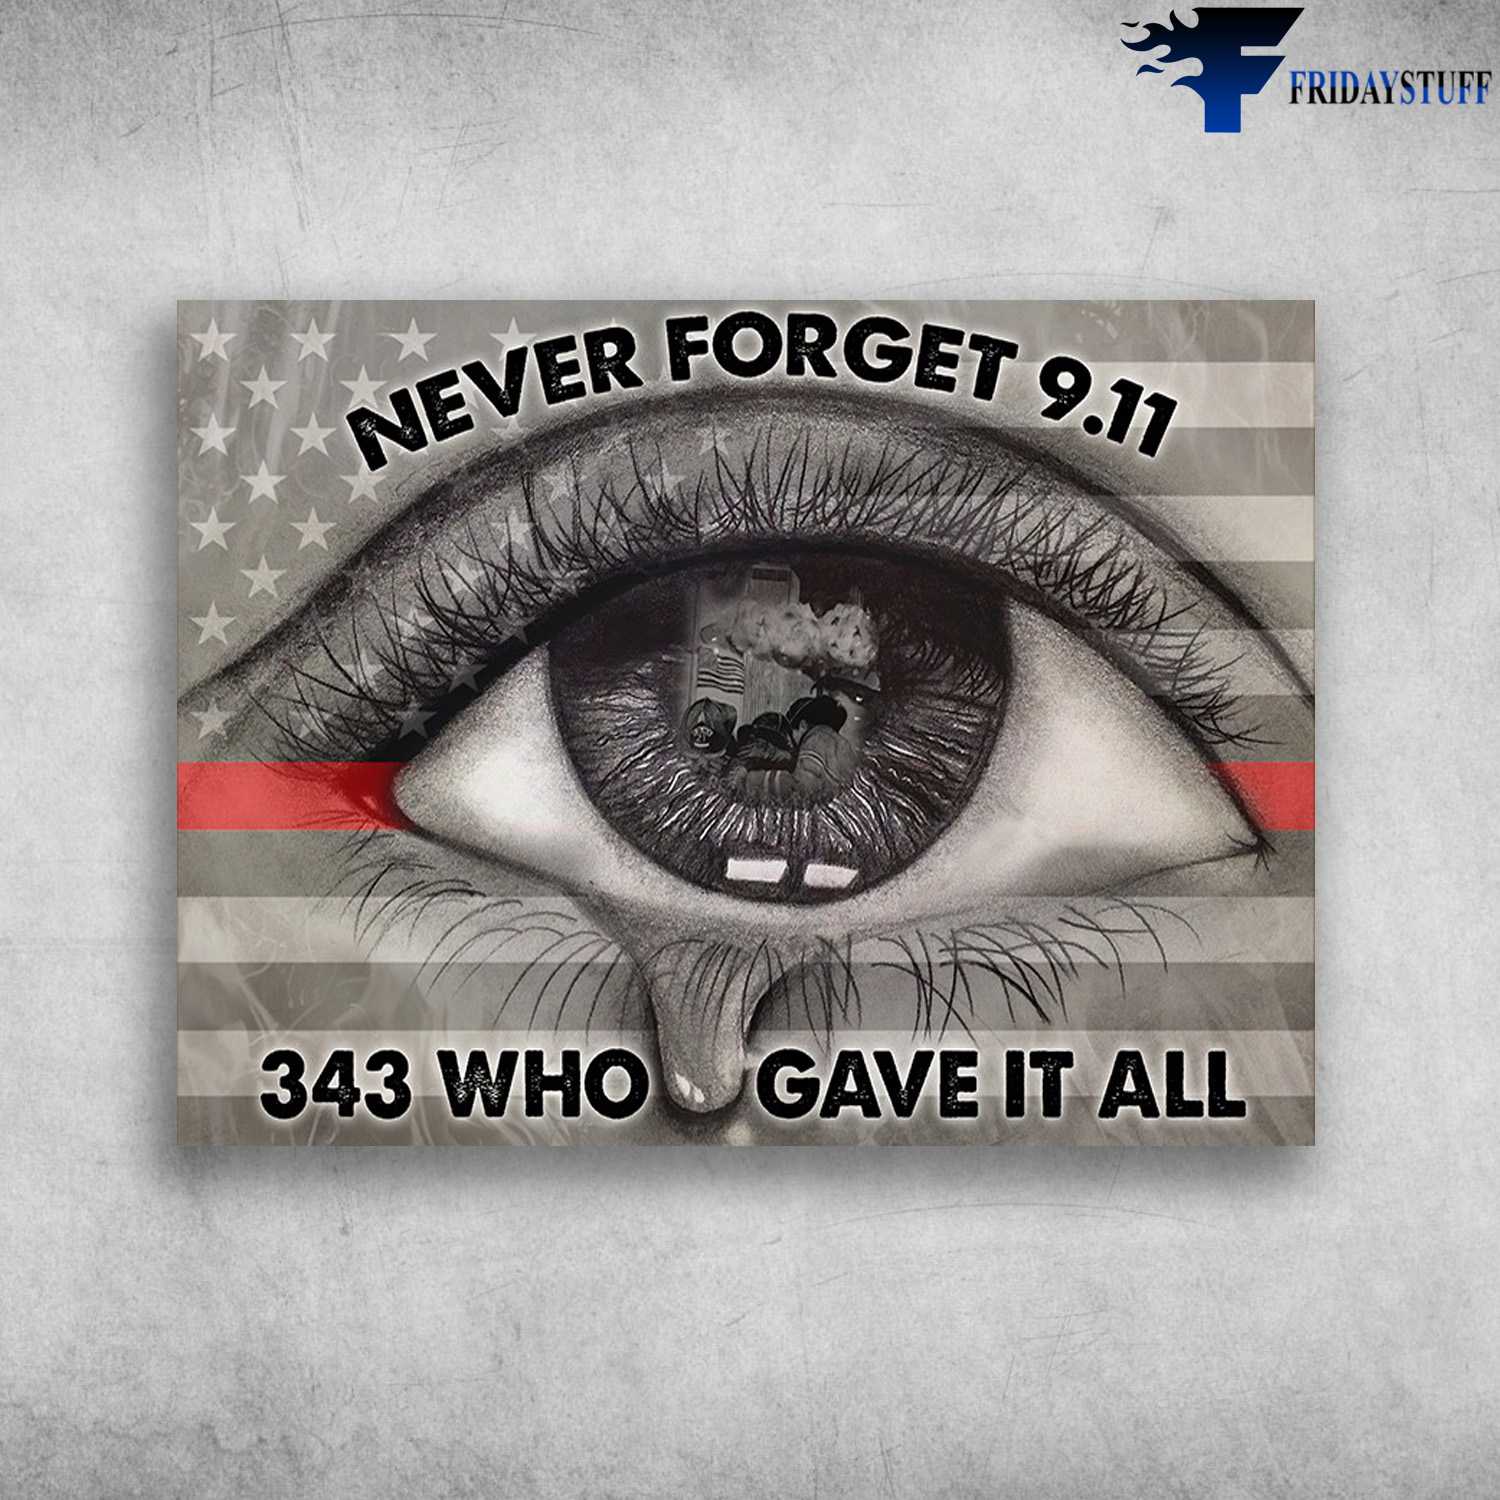 Never Forget 9.11, 343 Who Gave It All, The September 11 attacks